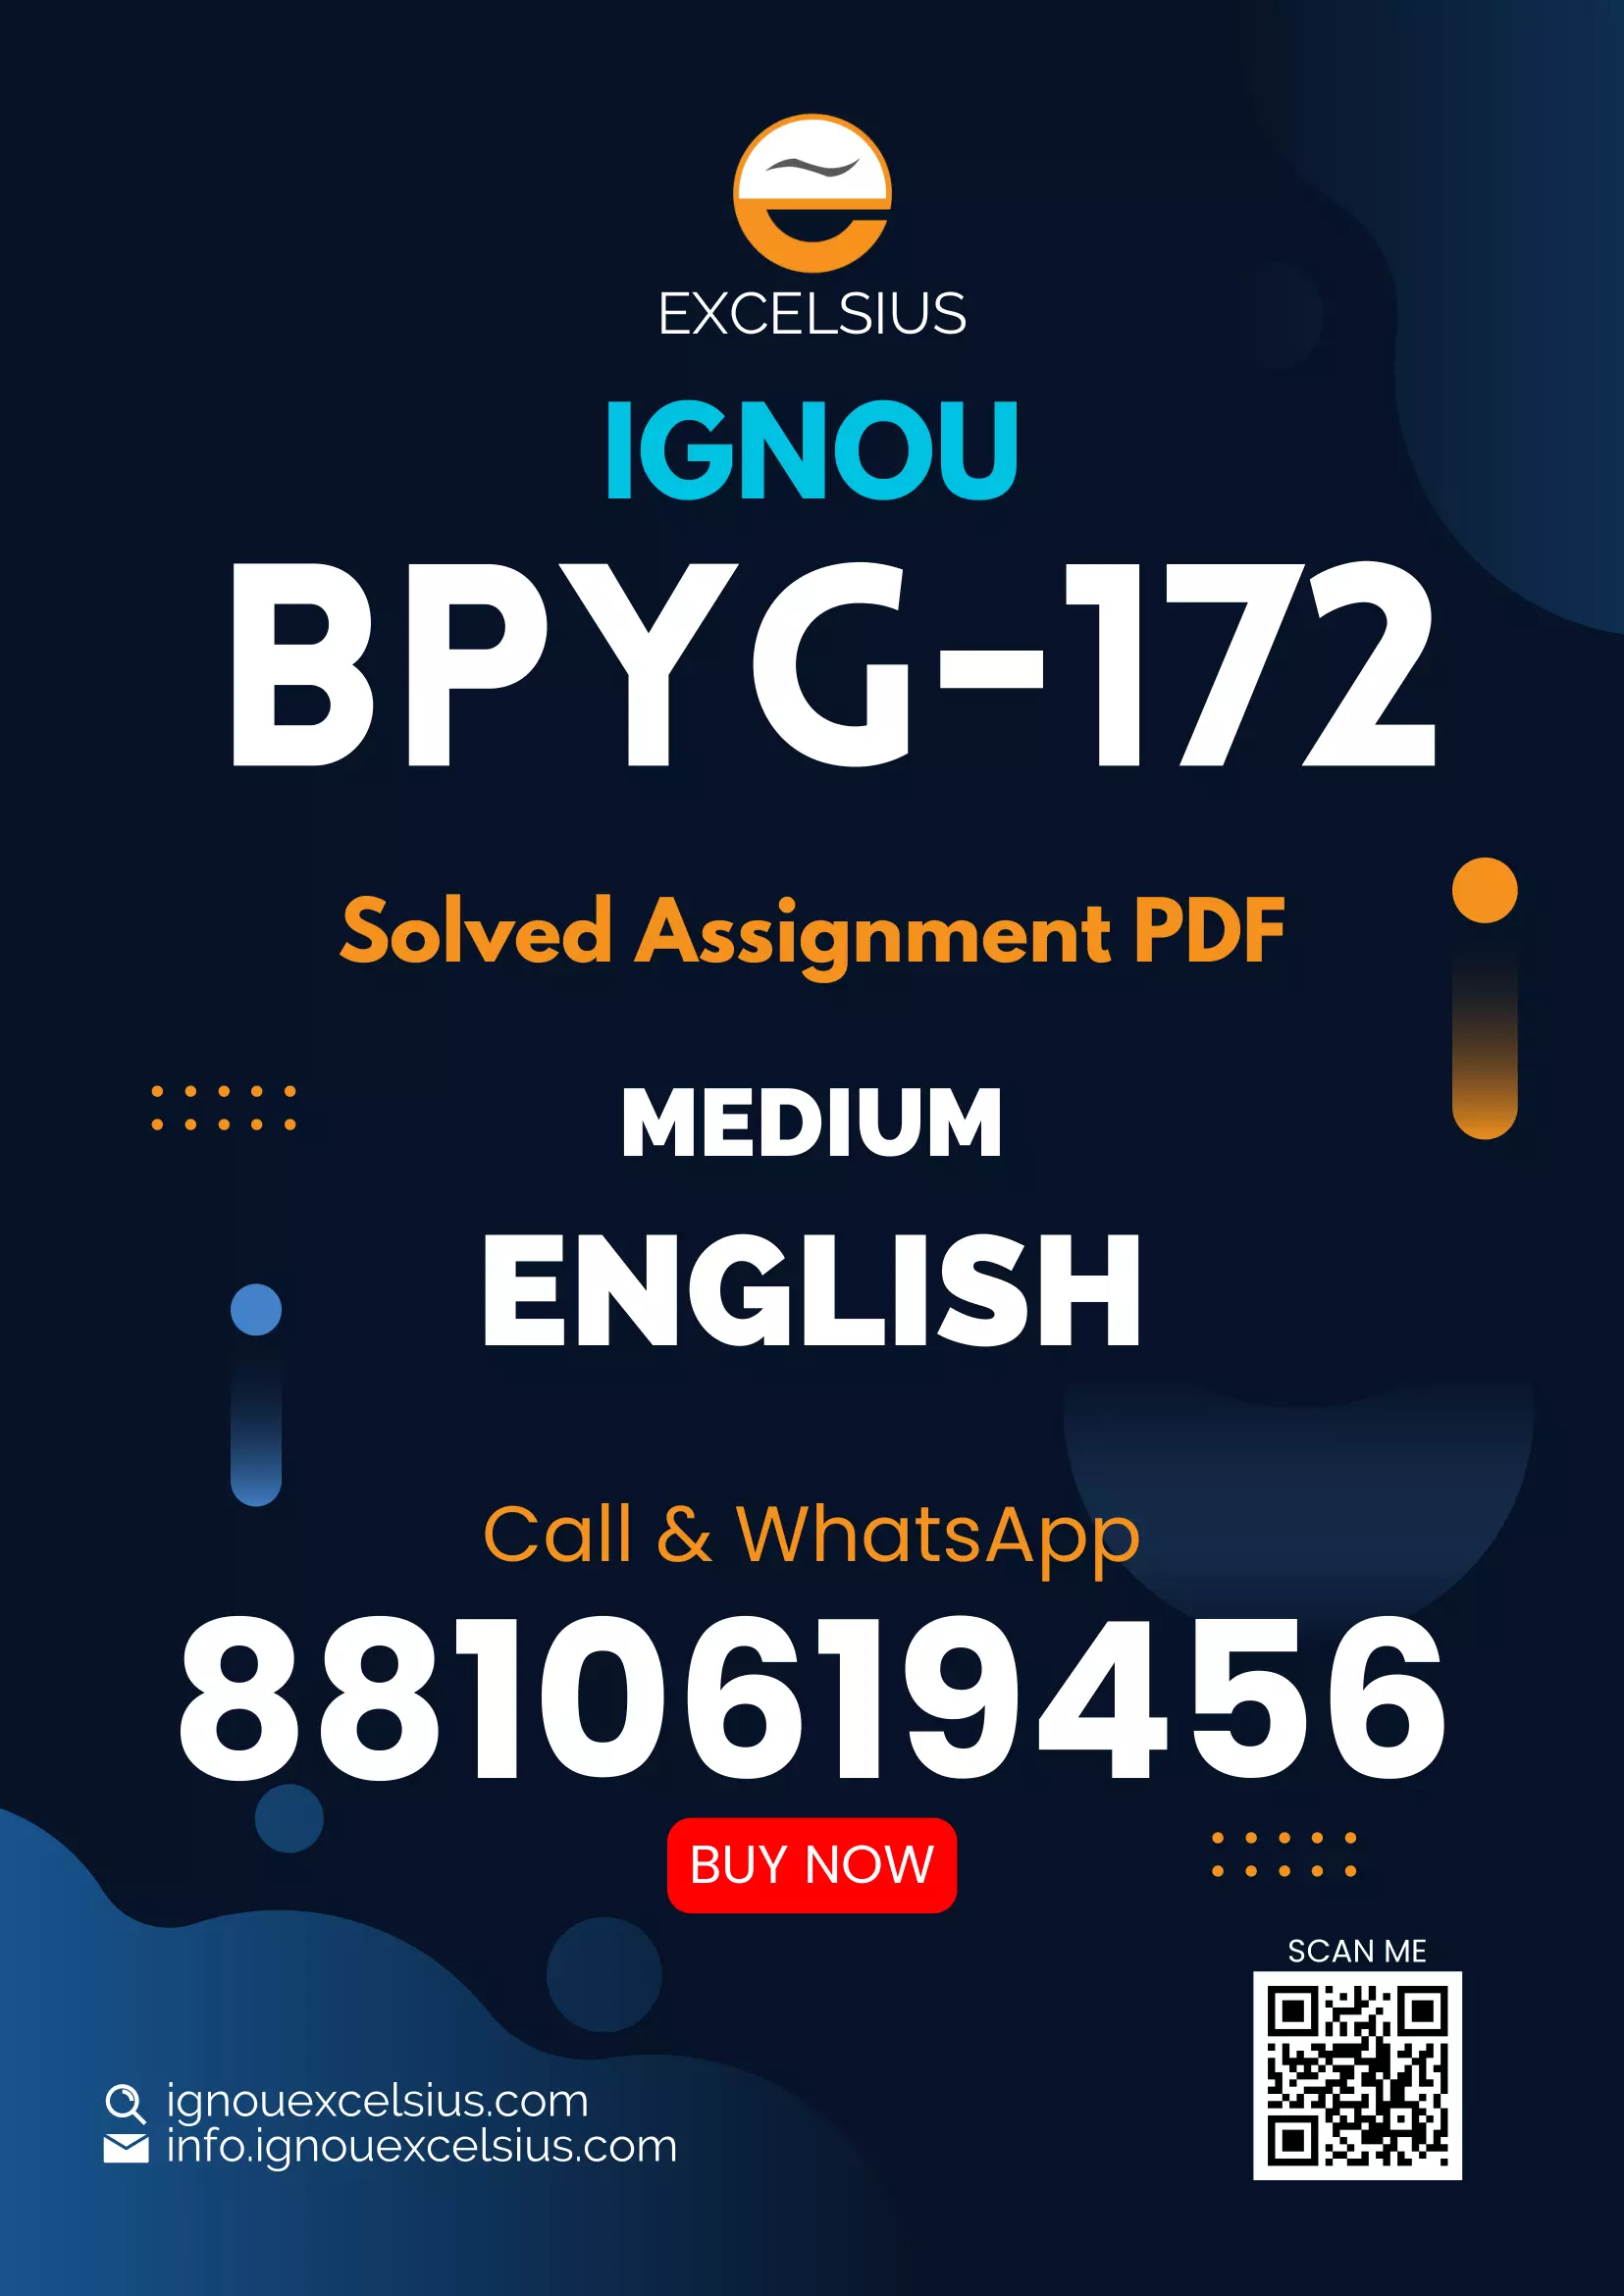 IGNOU BPYG-172 - Philosophy of Religion, Latest Solved Assignment-July 2022 – January 2023